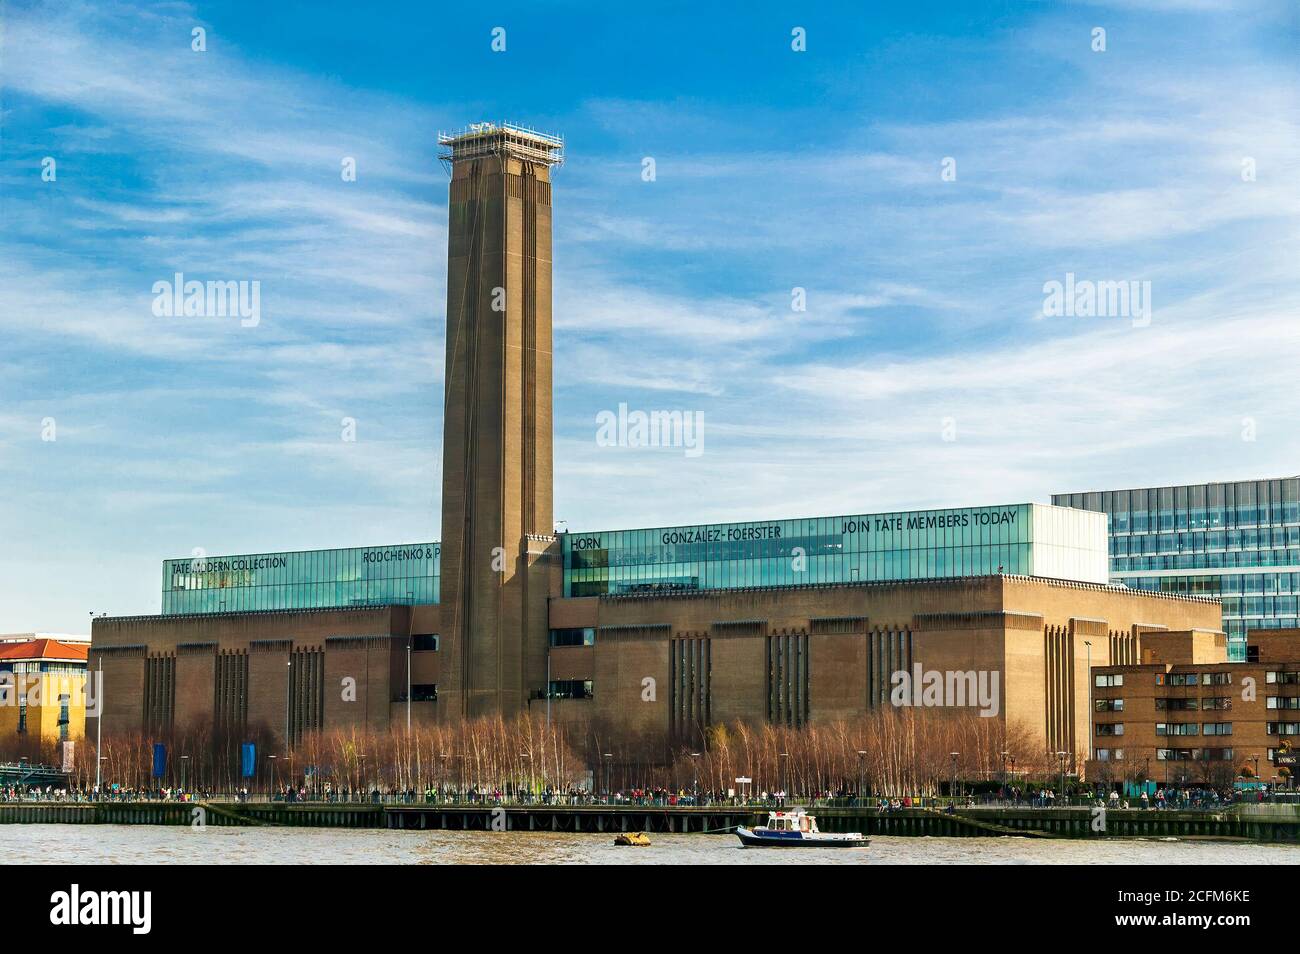 London, England, UK, March 15, 2009 : The Tate Modern nationsl art gallery museum on the South bank of the River Thames built in 1947 as a power stati Stock Photo